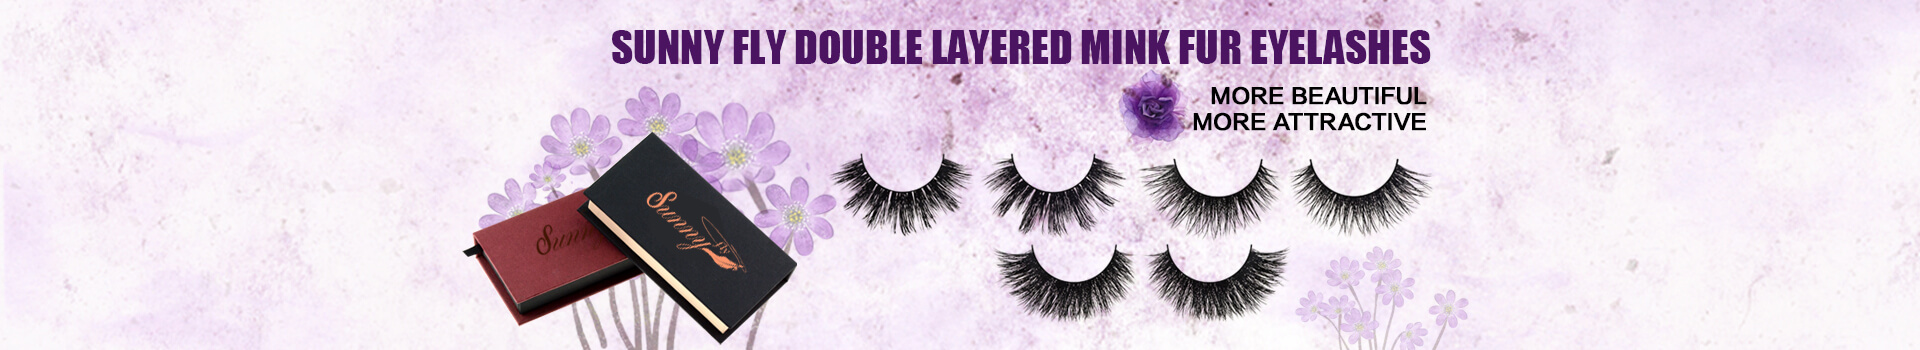 Double Layered Nerz Pelz Wimpern MD22